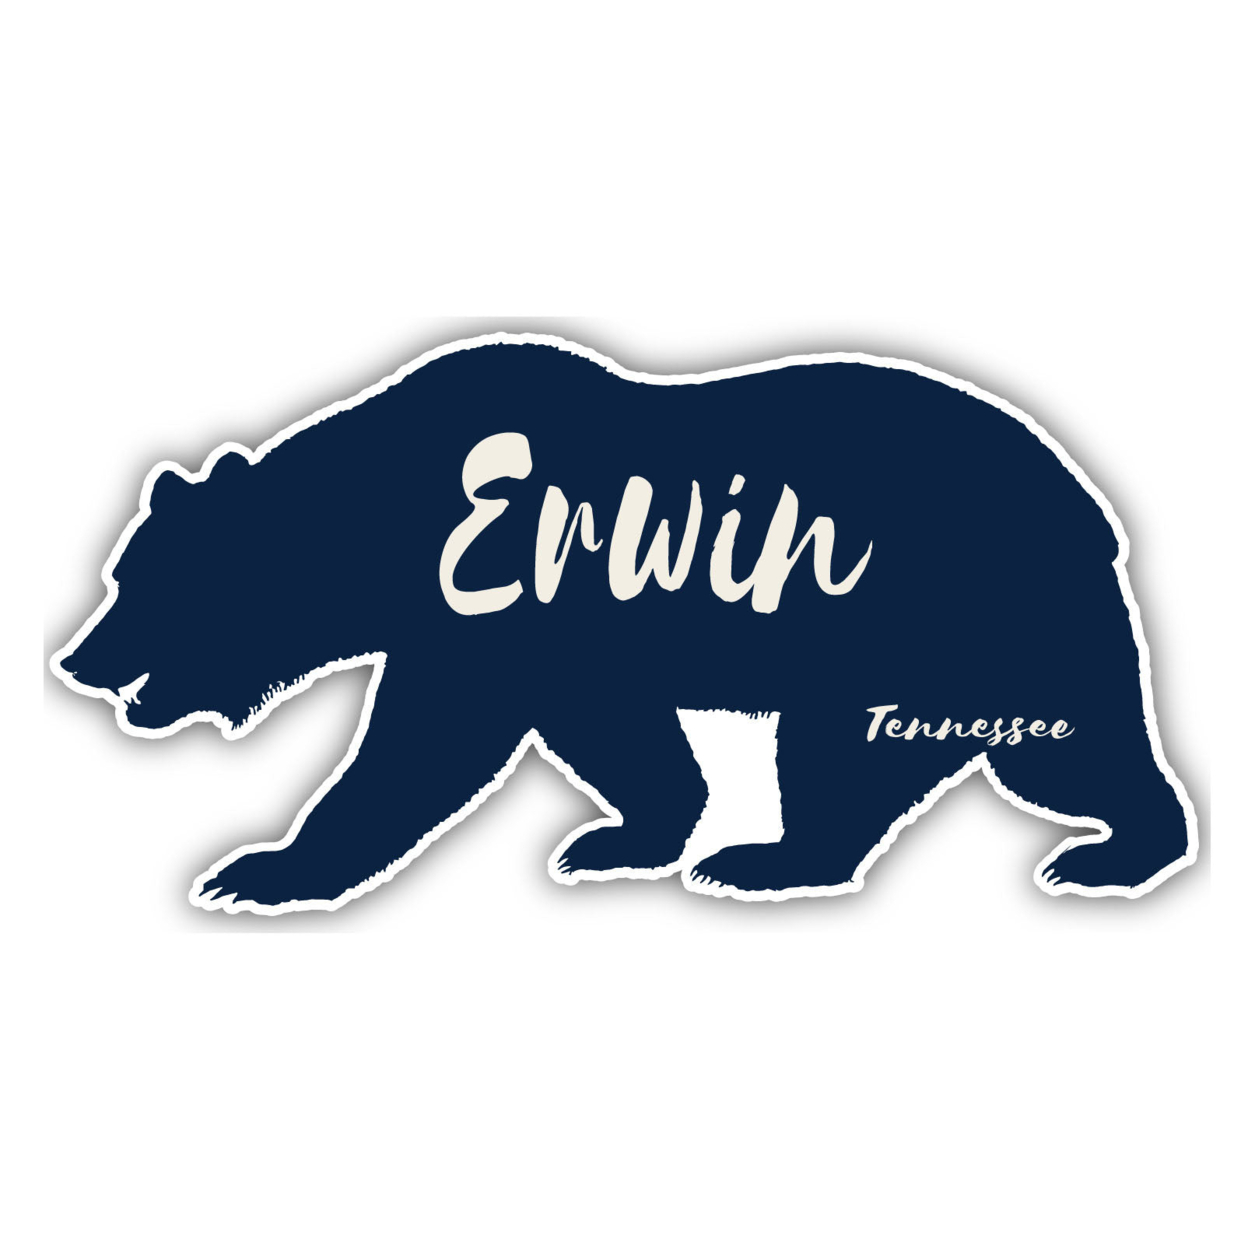 Erwin Tennessee Souvenir Decorative Stickers (Choose Theme And Size) - Single Unit, 2-Inch, Bear